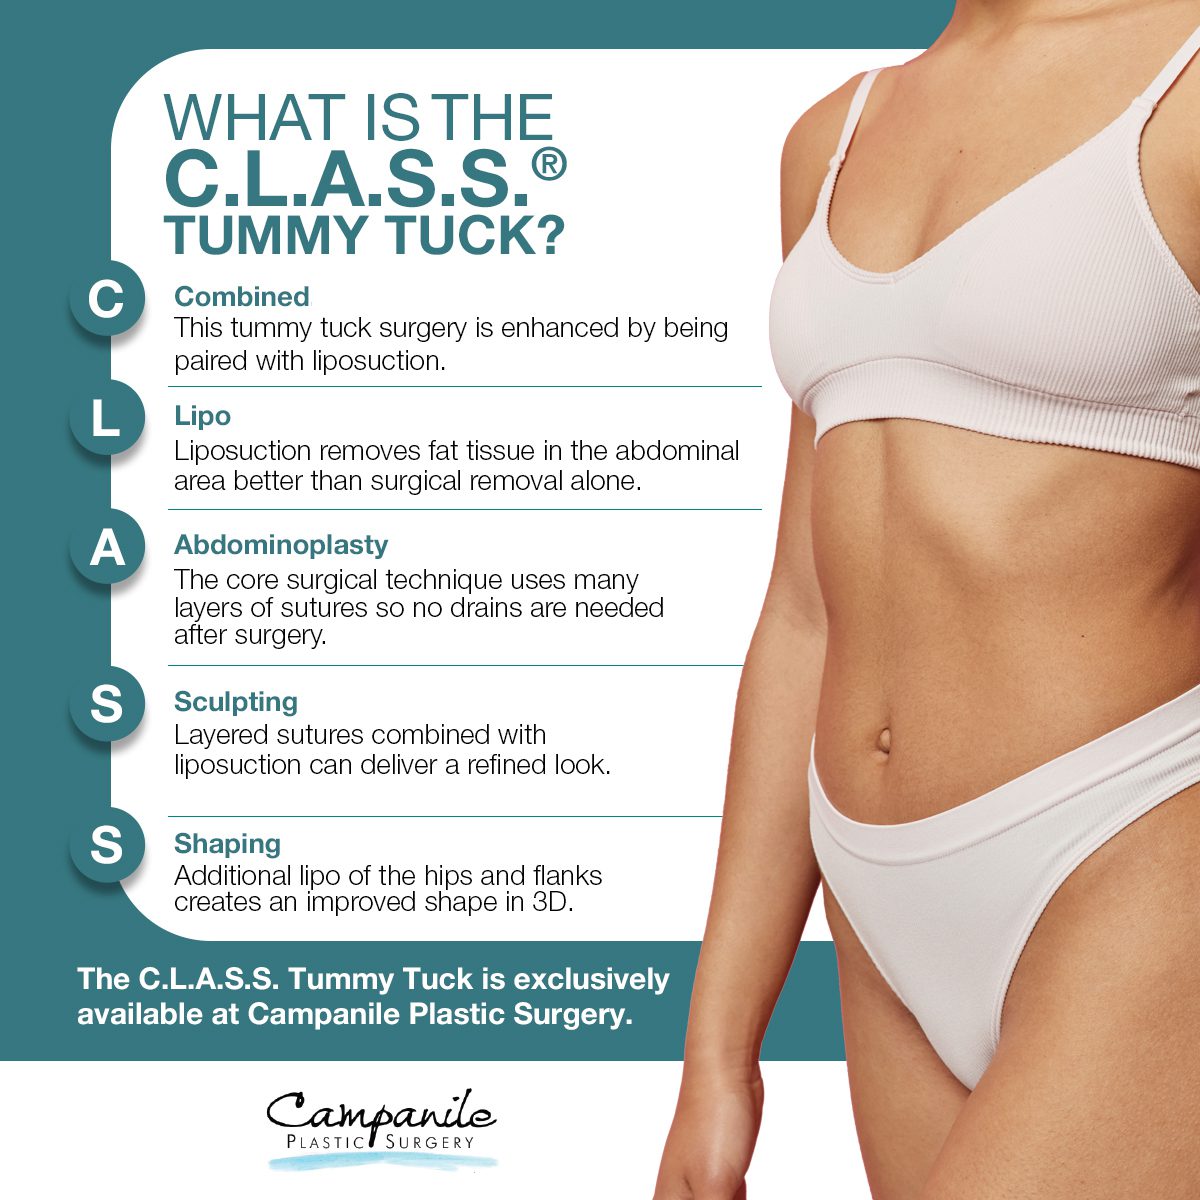 What Is the C.L.A.S.S.® Tummy Tuck?